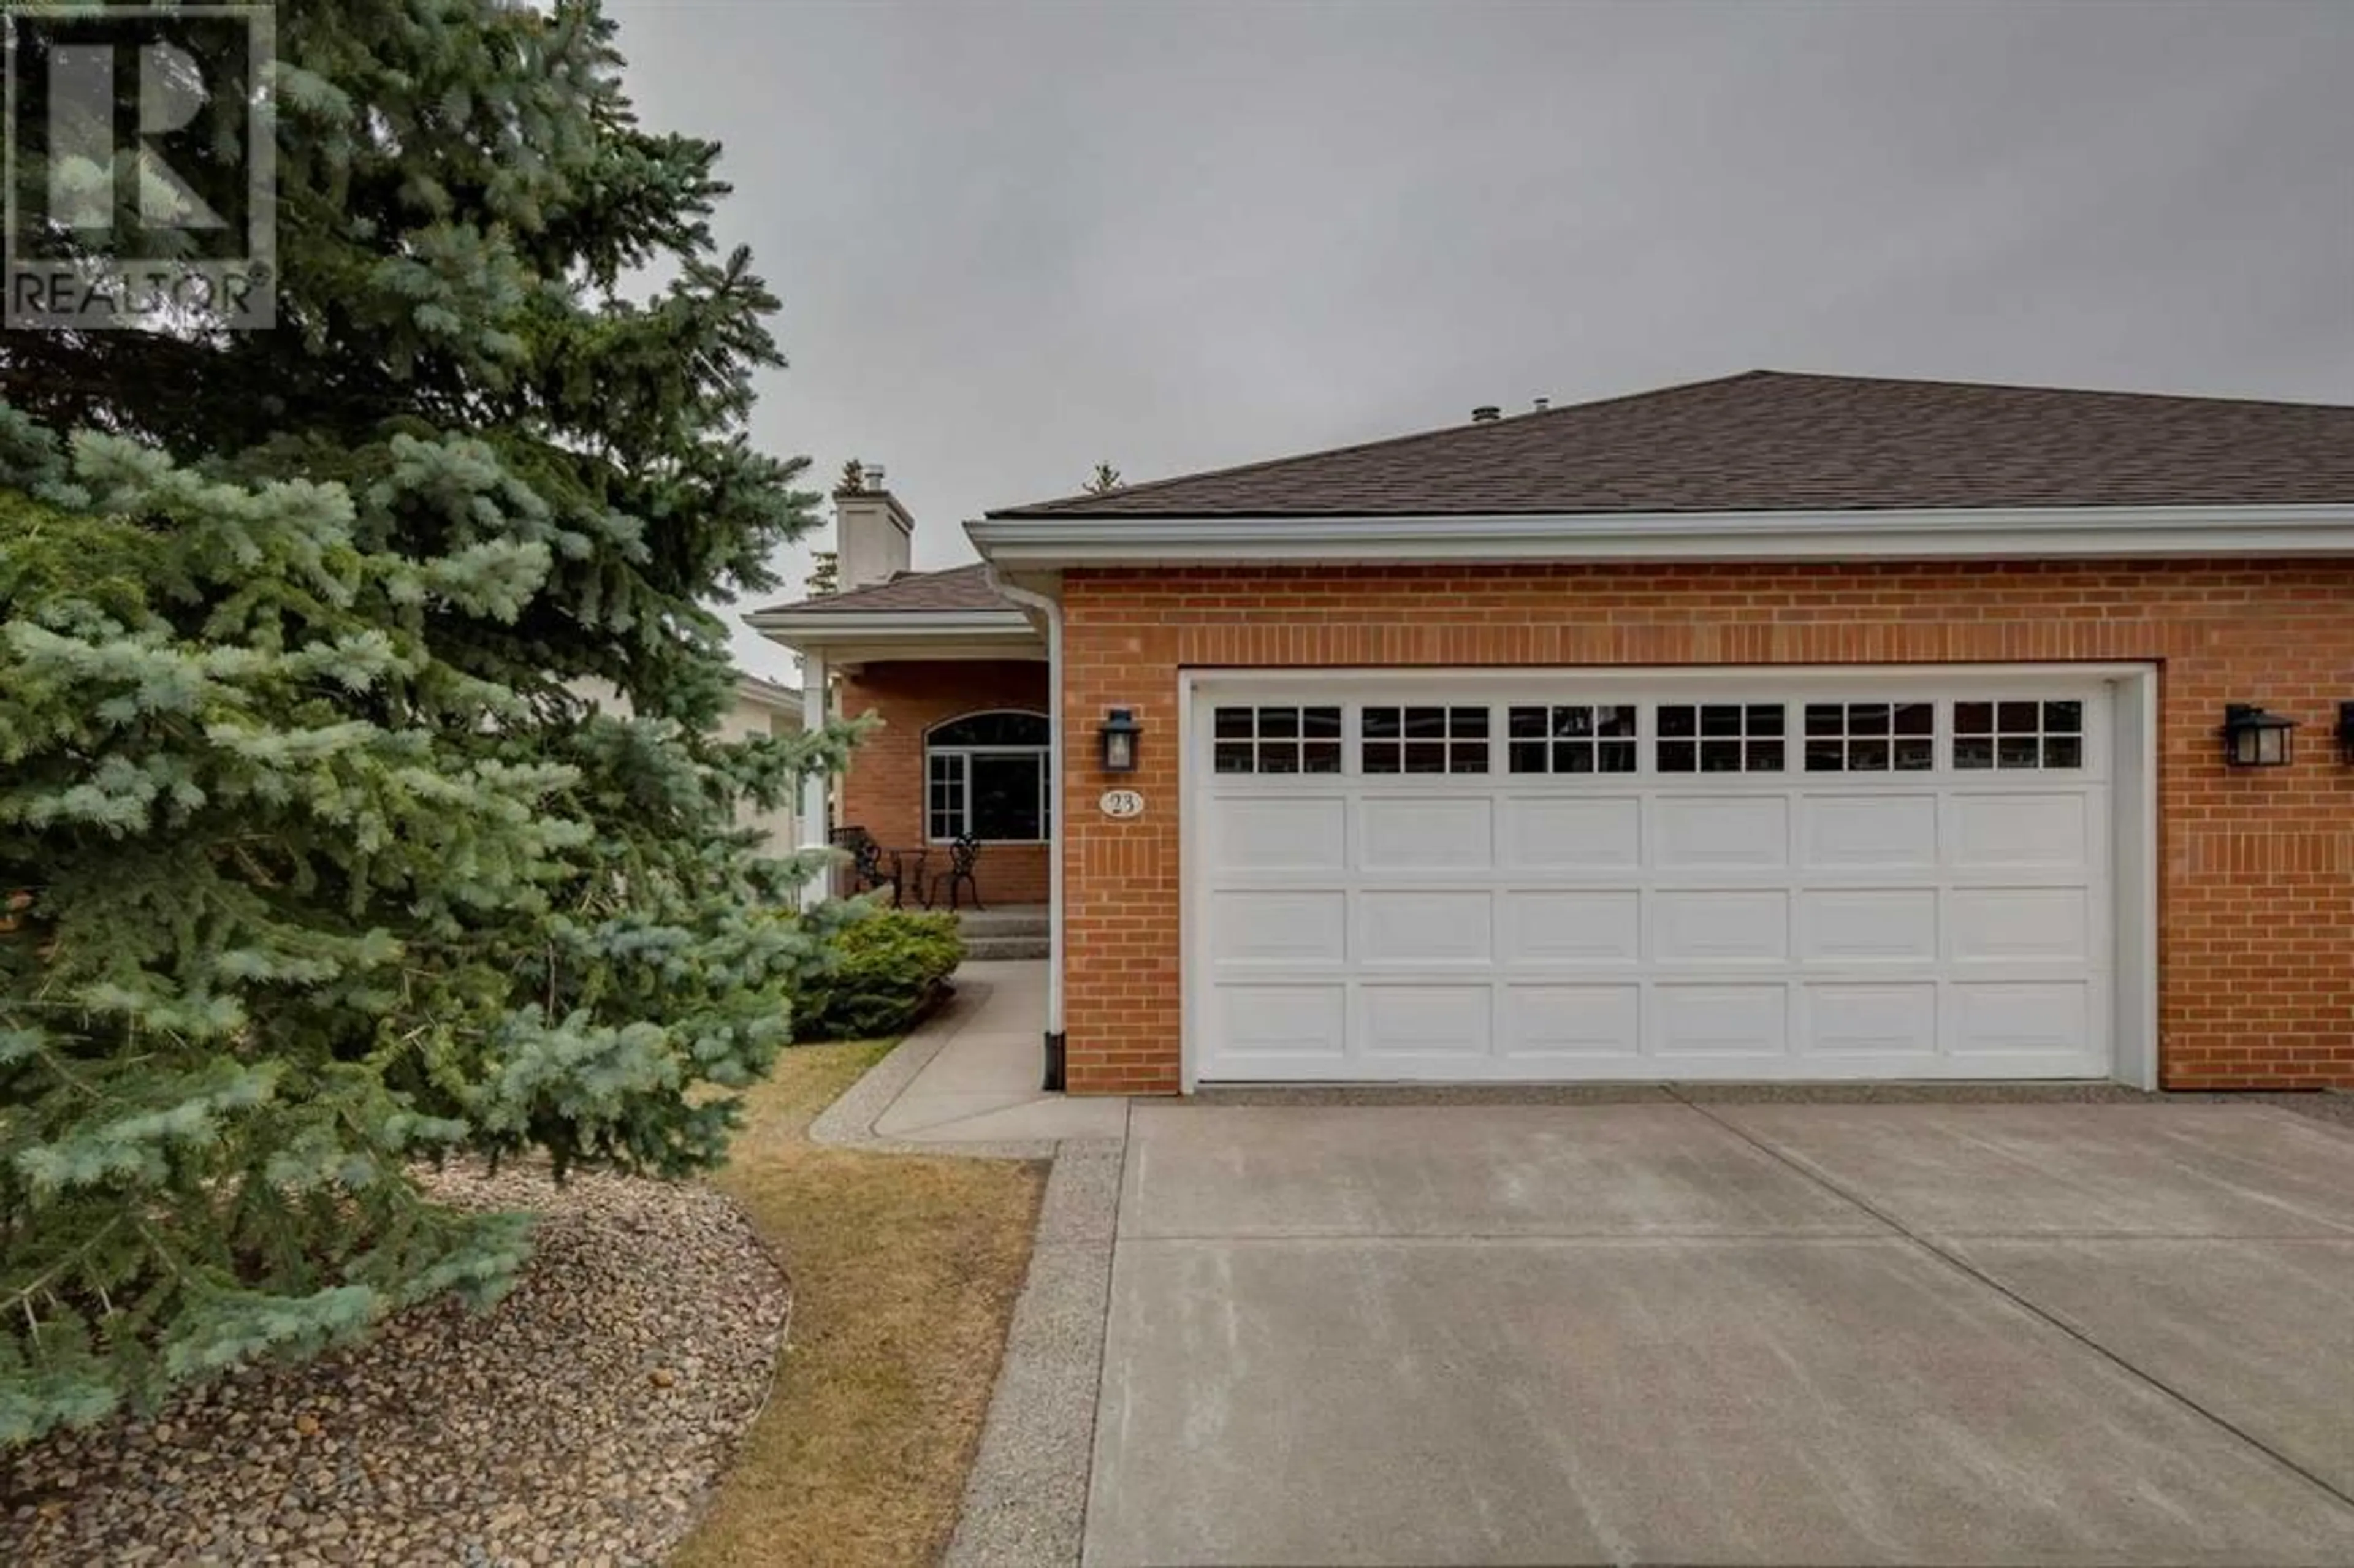 Home with brick exterior material for 23 Prominence Point SW, Calgary Alberta T3H3E8